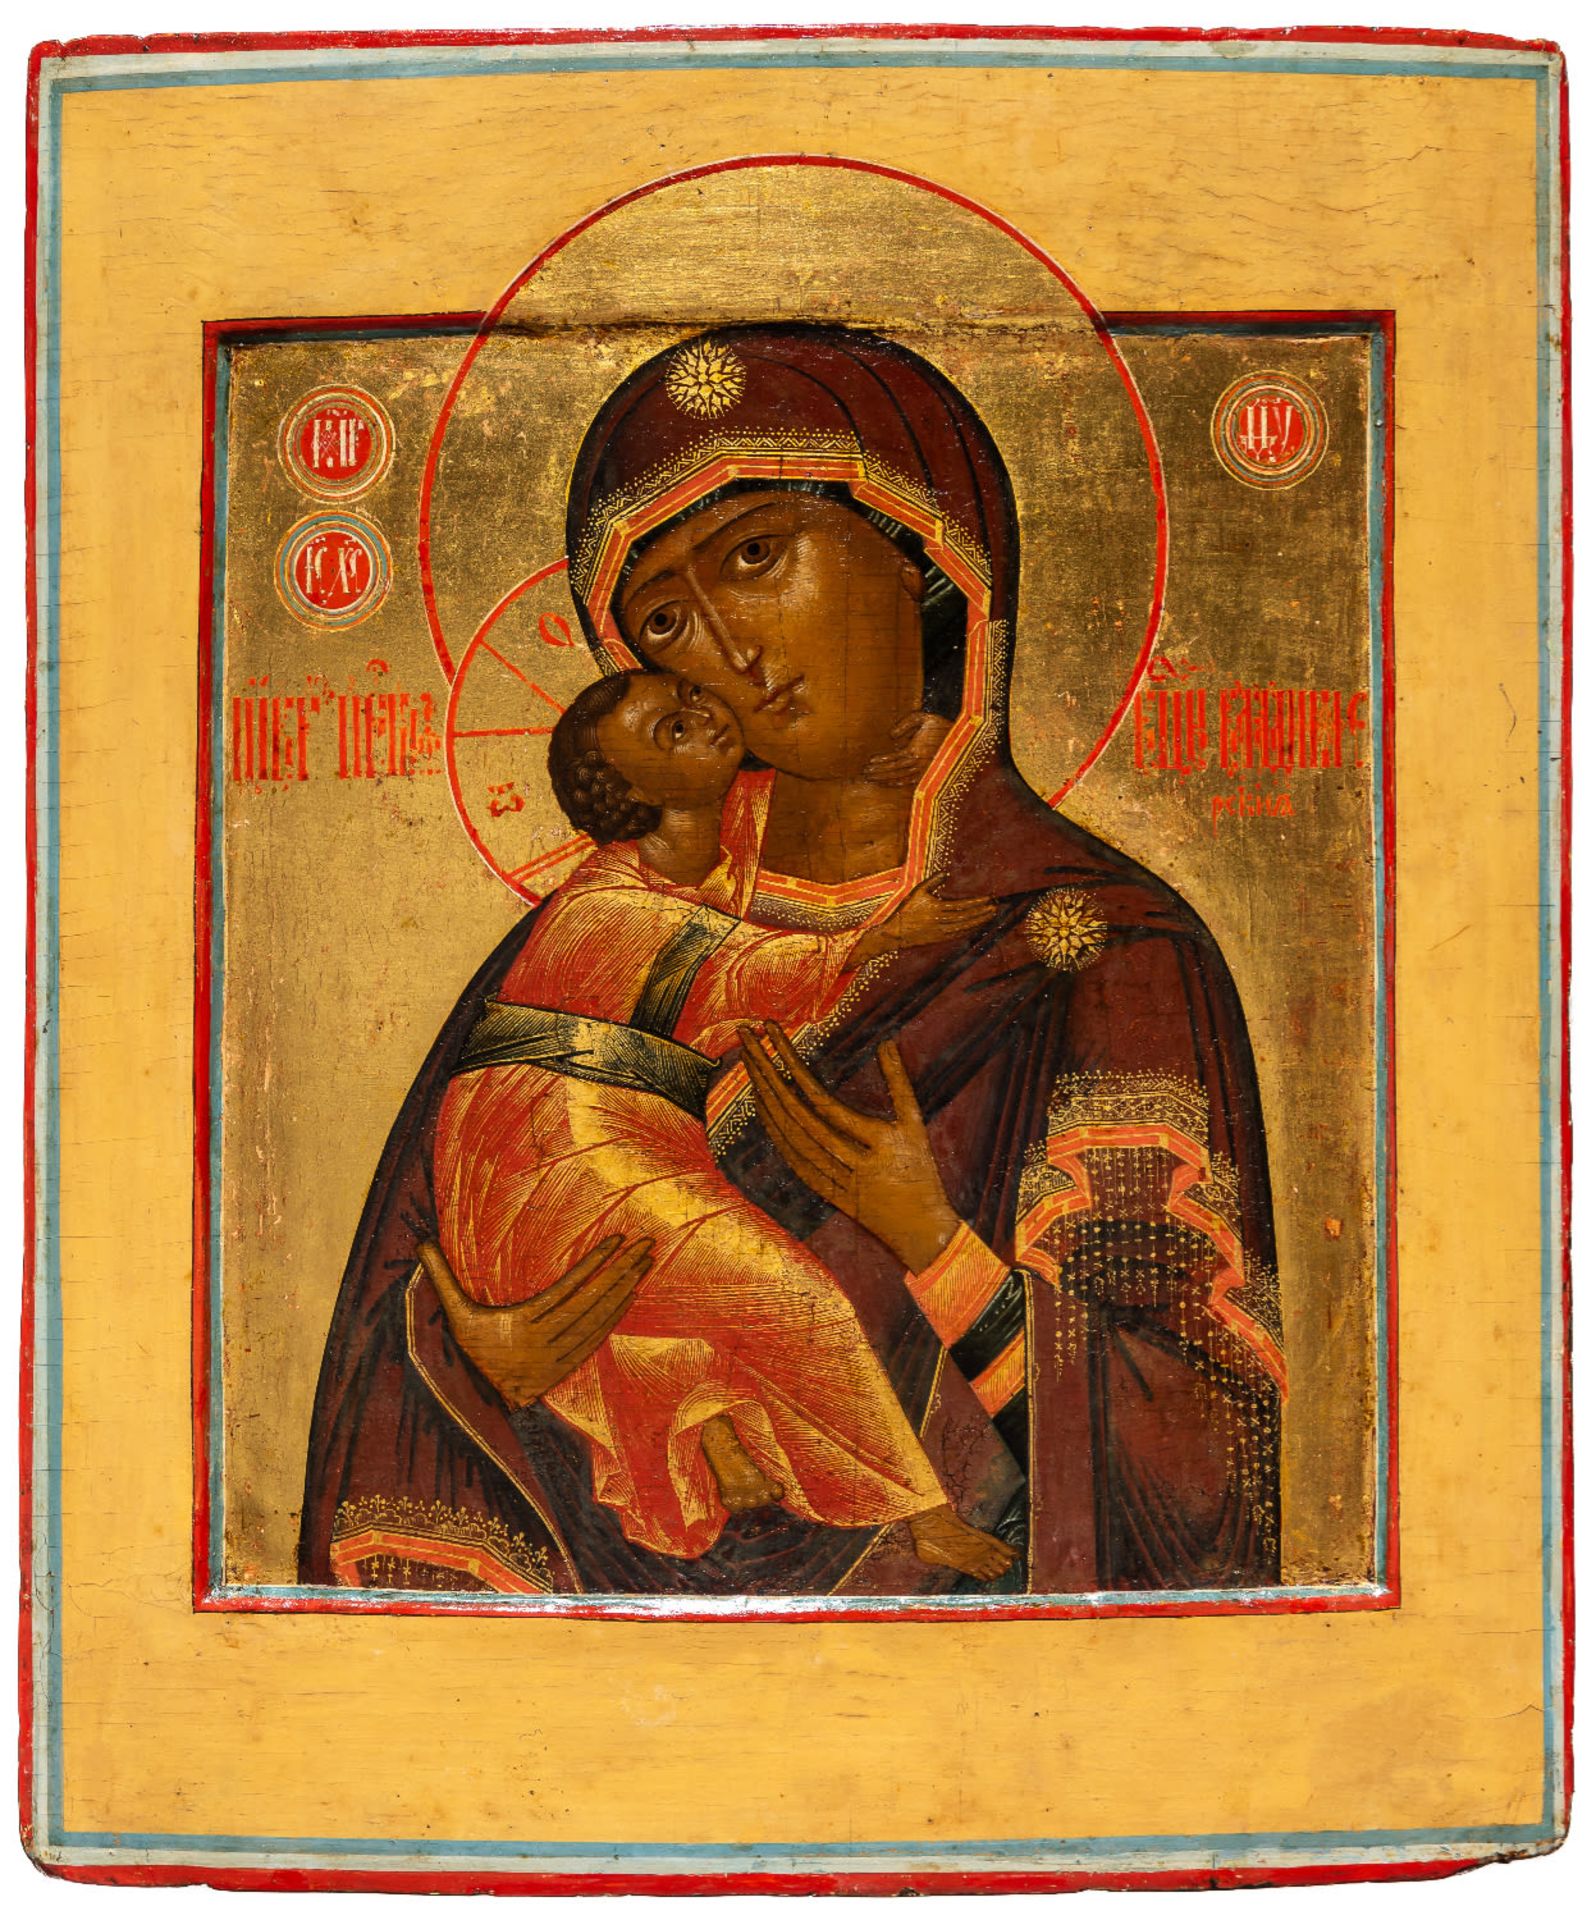 FINELY PAINTED RUSSIAN ICON SHOWING THE MOTHER OF GOD VLADIMIRSKAYA